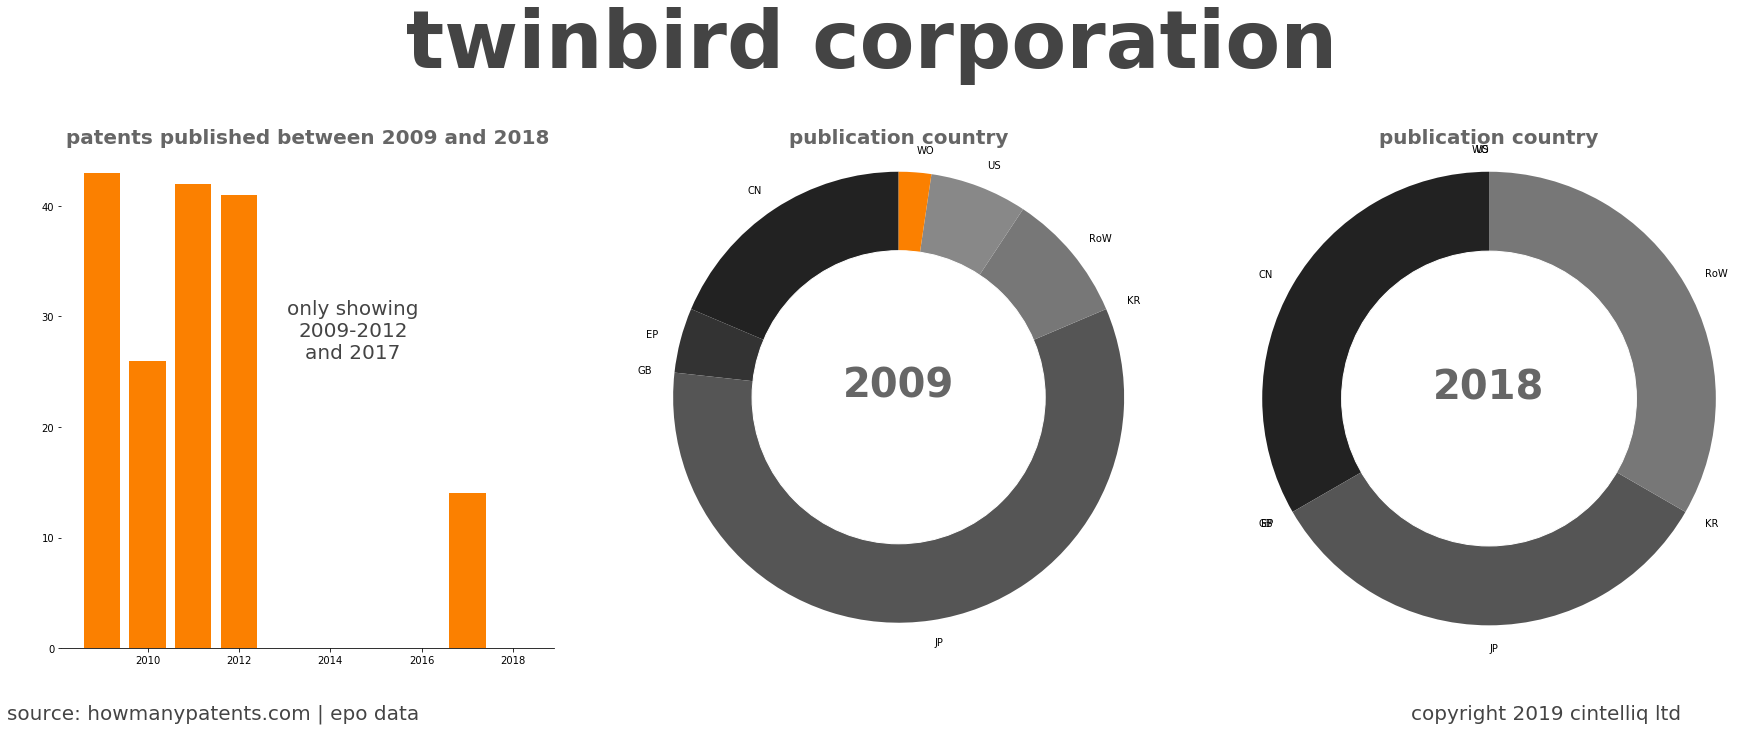 summary of patents for Twinbird Corporation